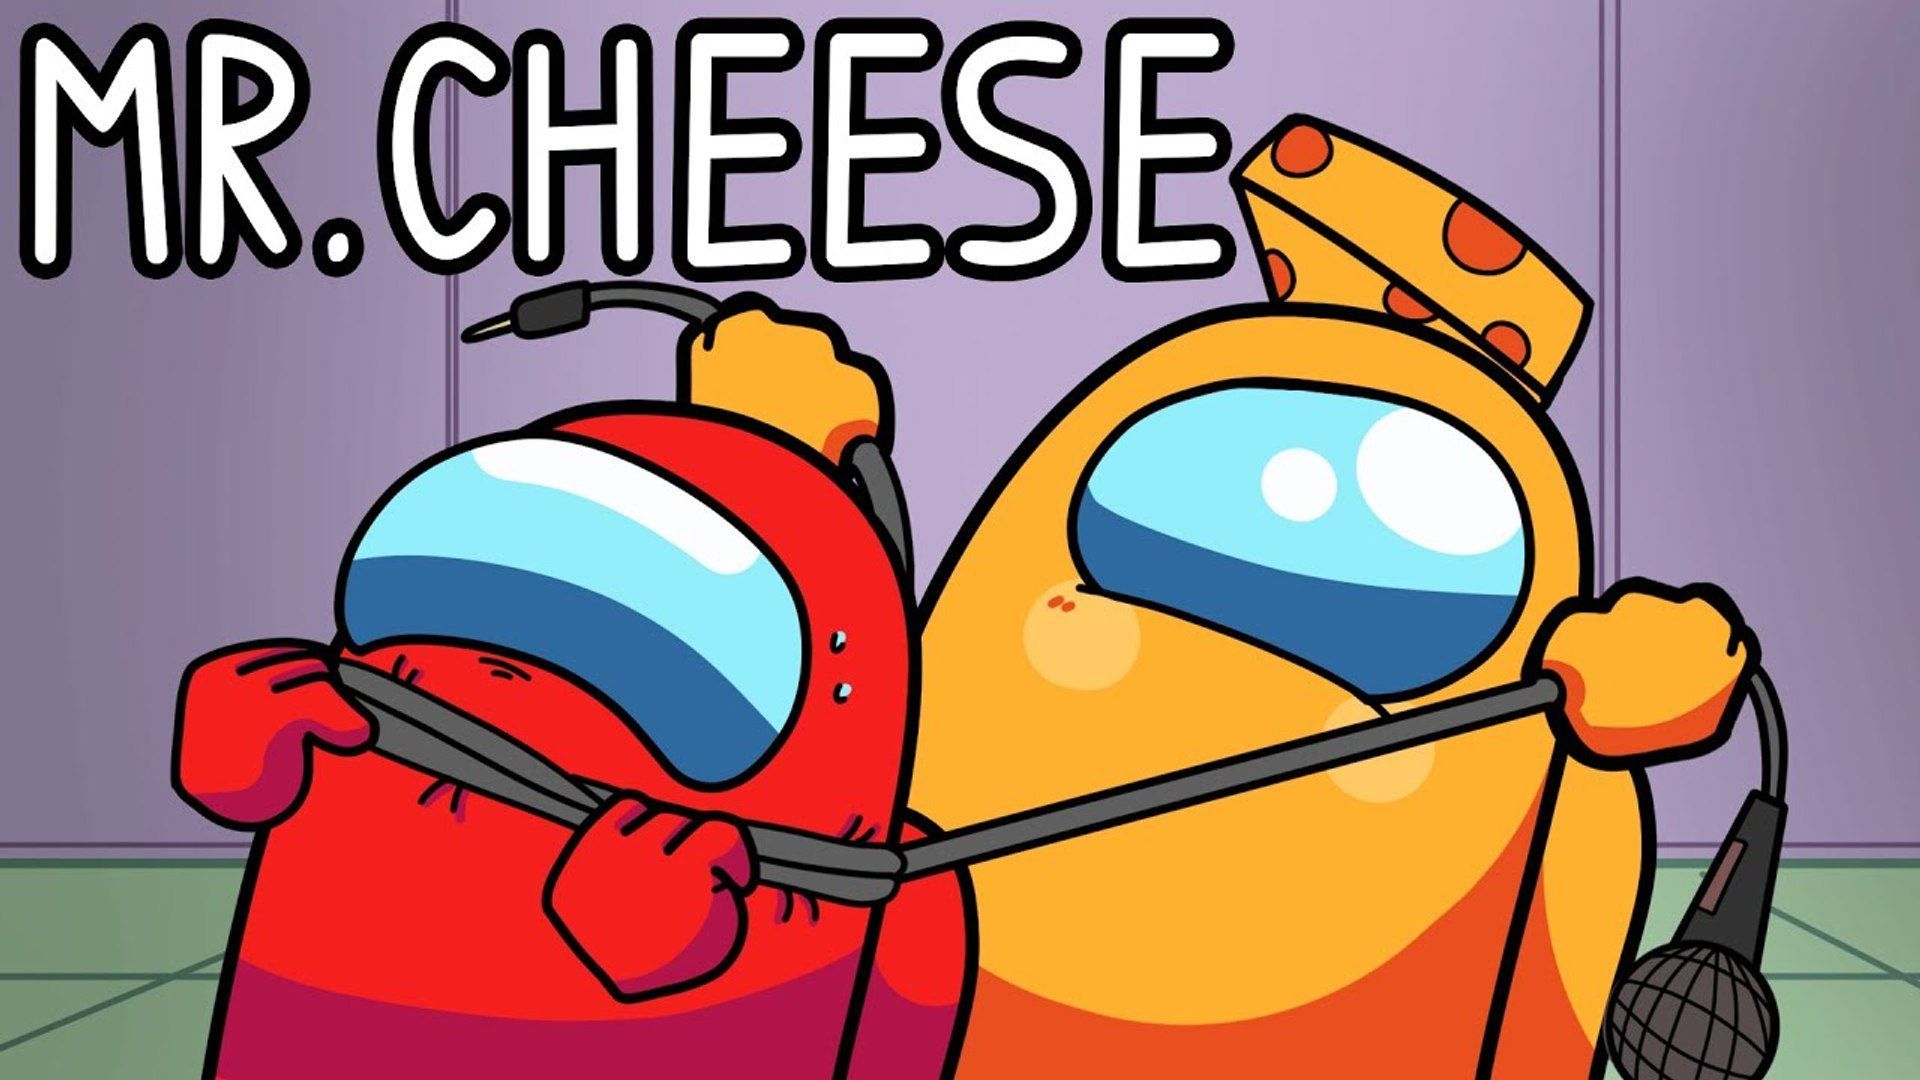 Mr Cheese Wallpaper Free Mr Cheese Background